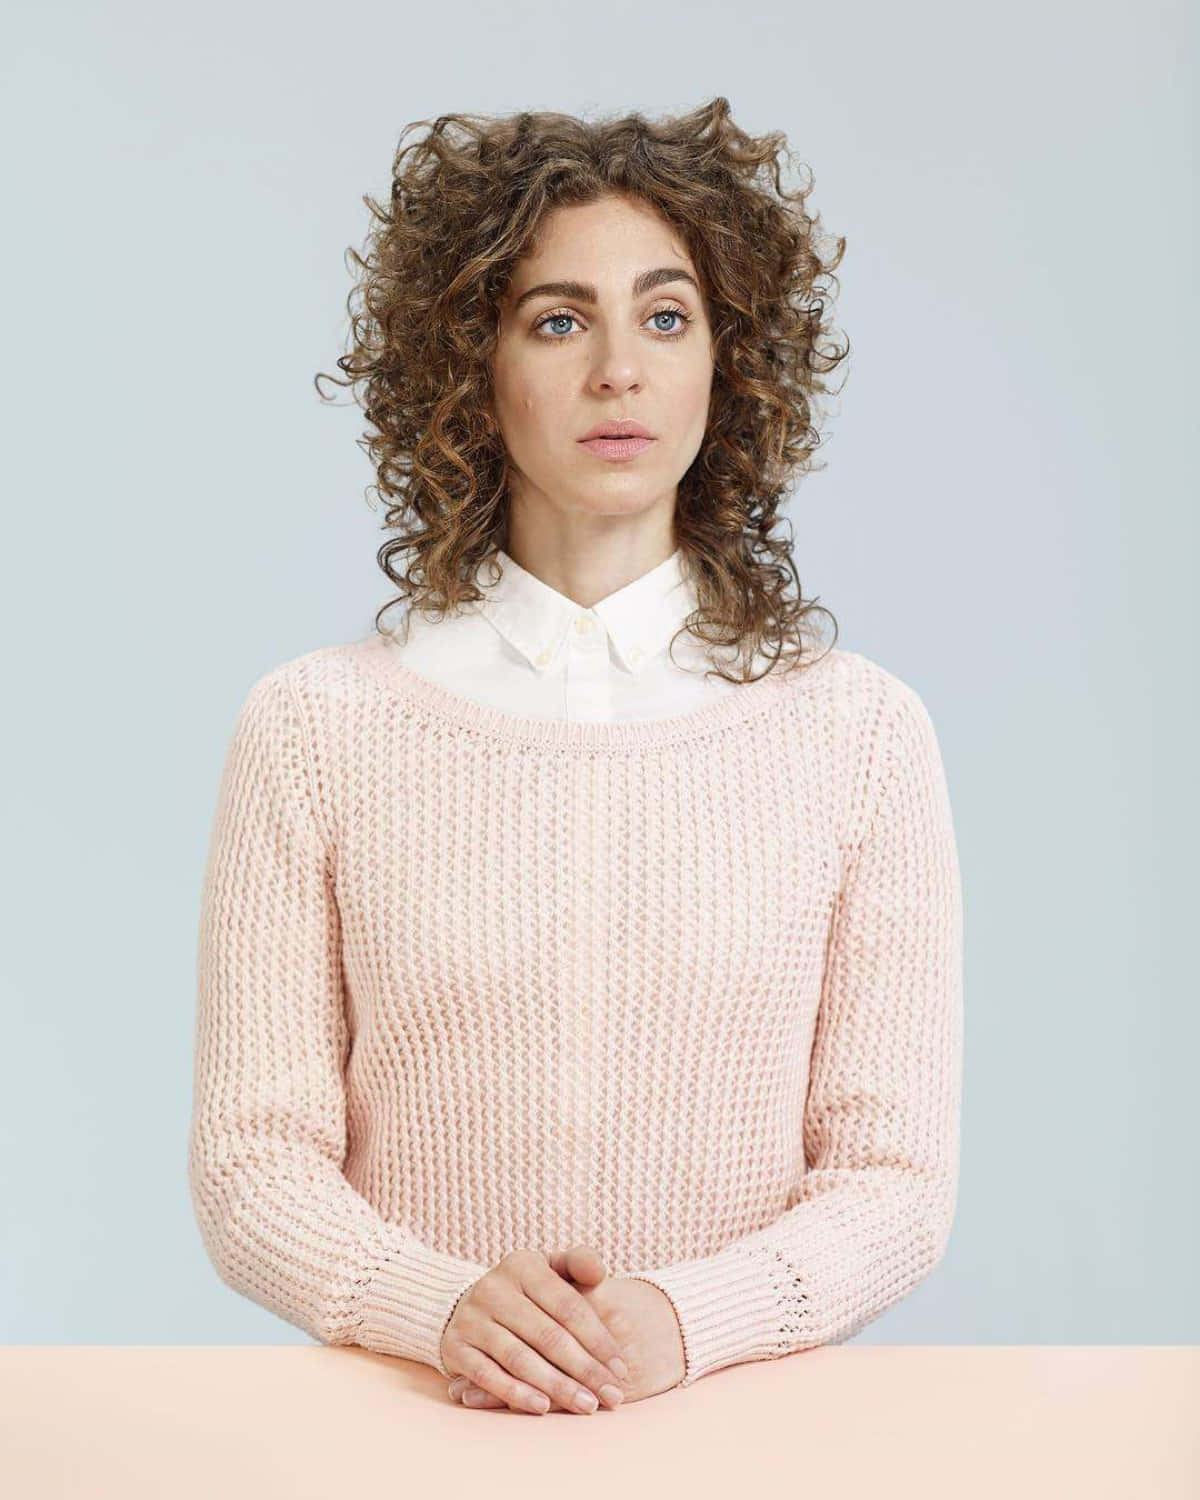 Curly Haired Womanin Pink Sweater Wallpaper